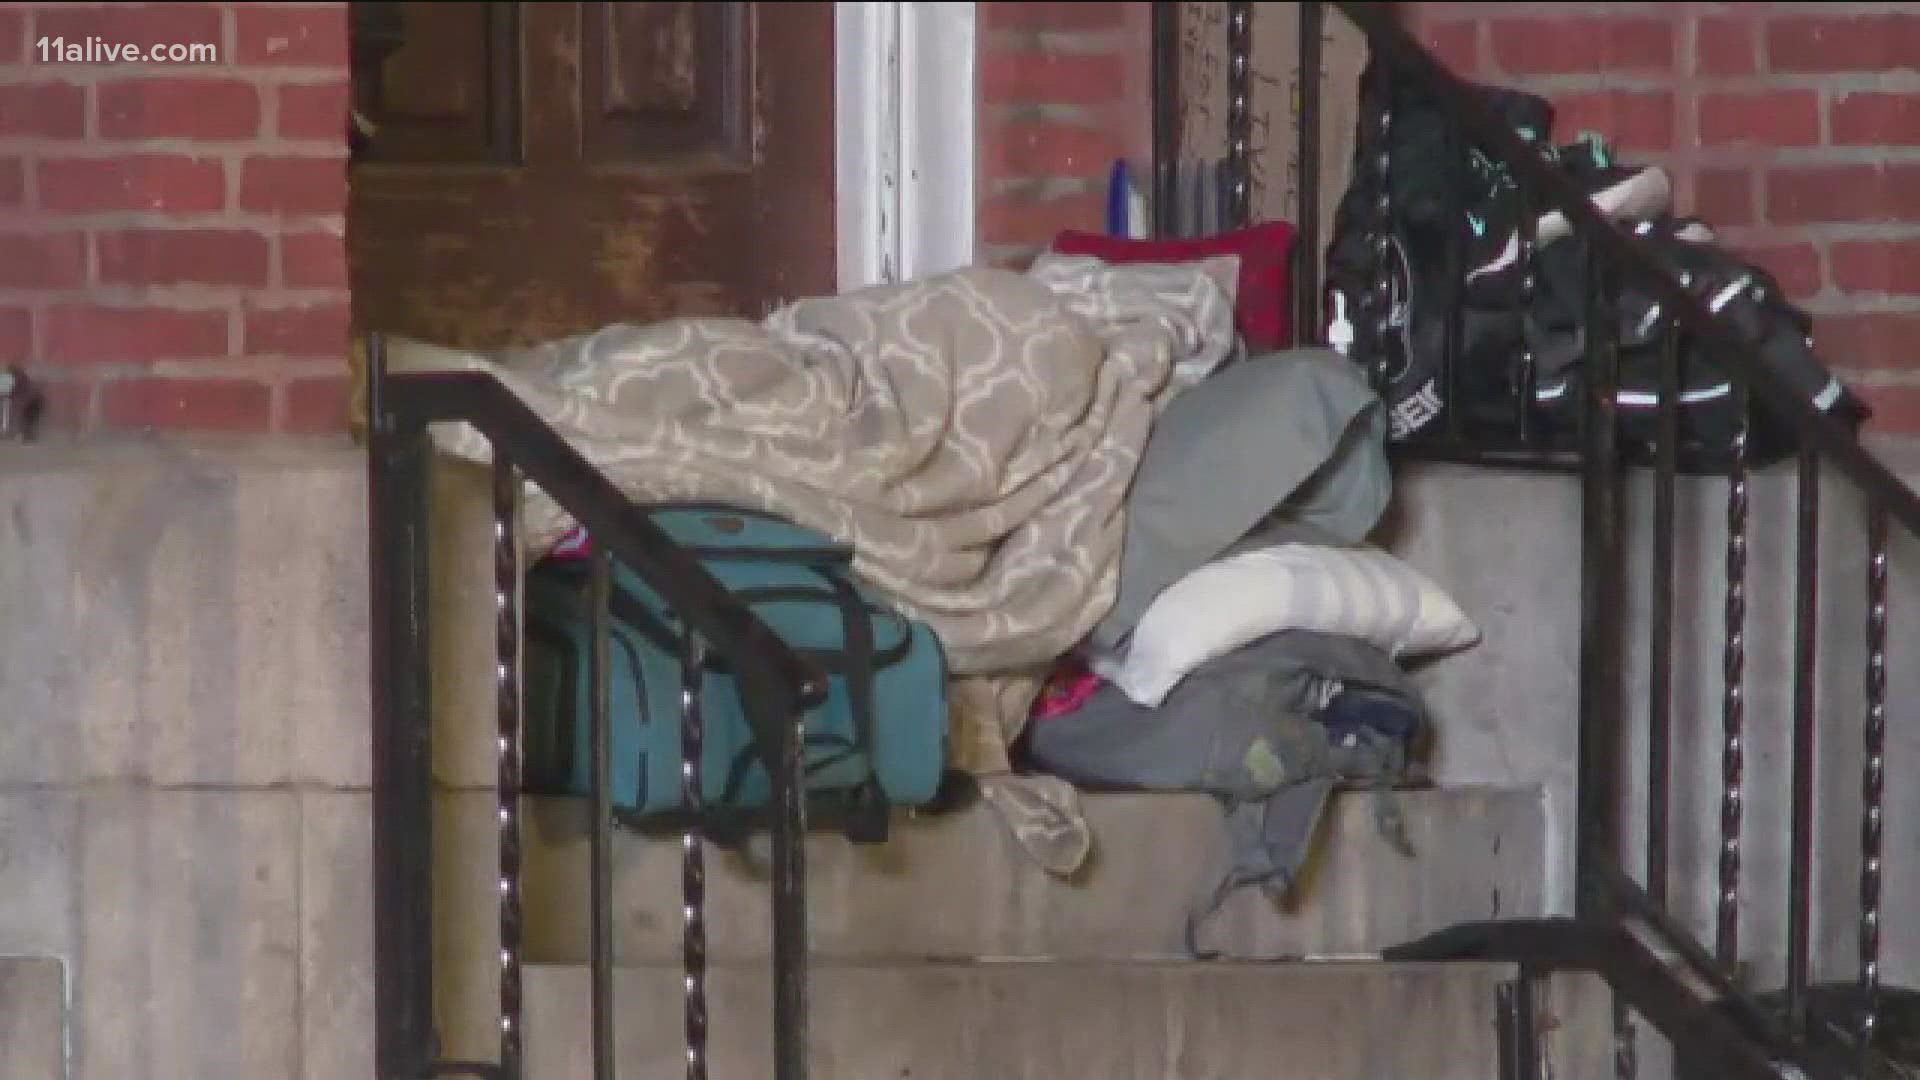 The city has received $3.5 million dollars to help those battling homelessness